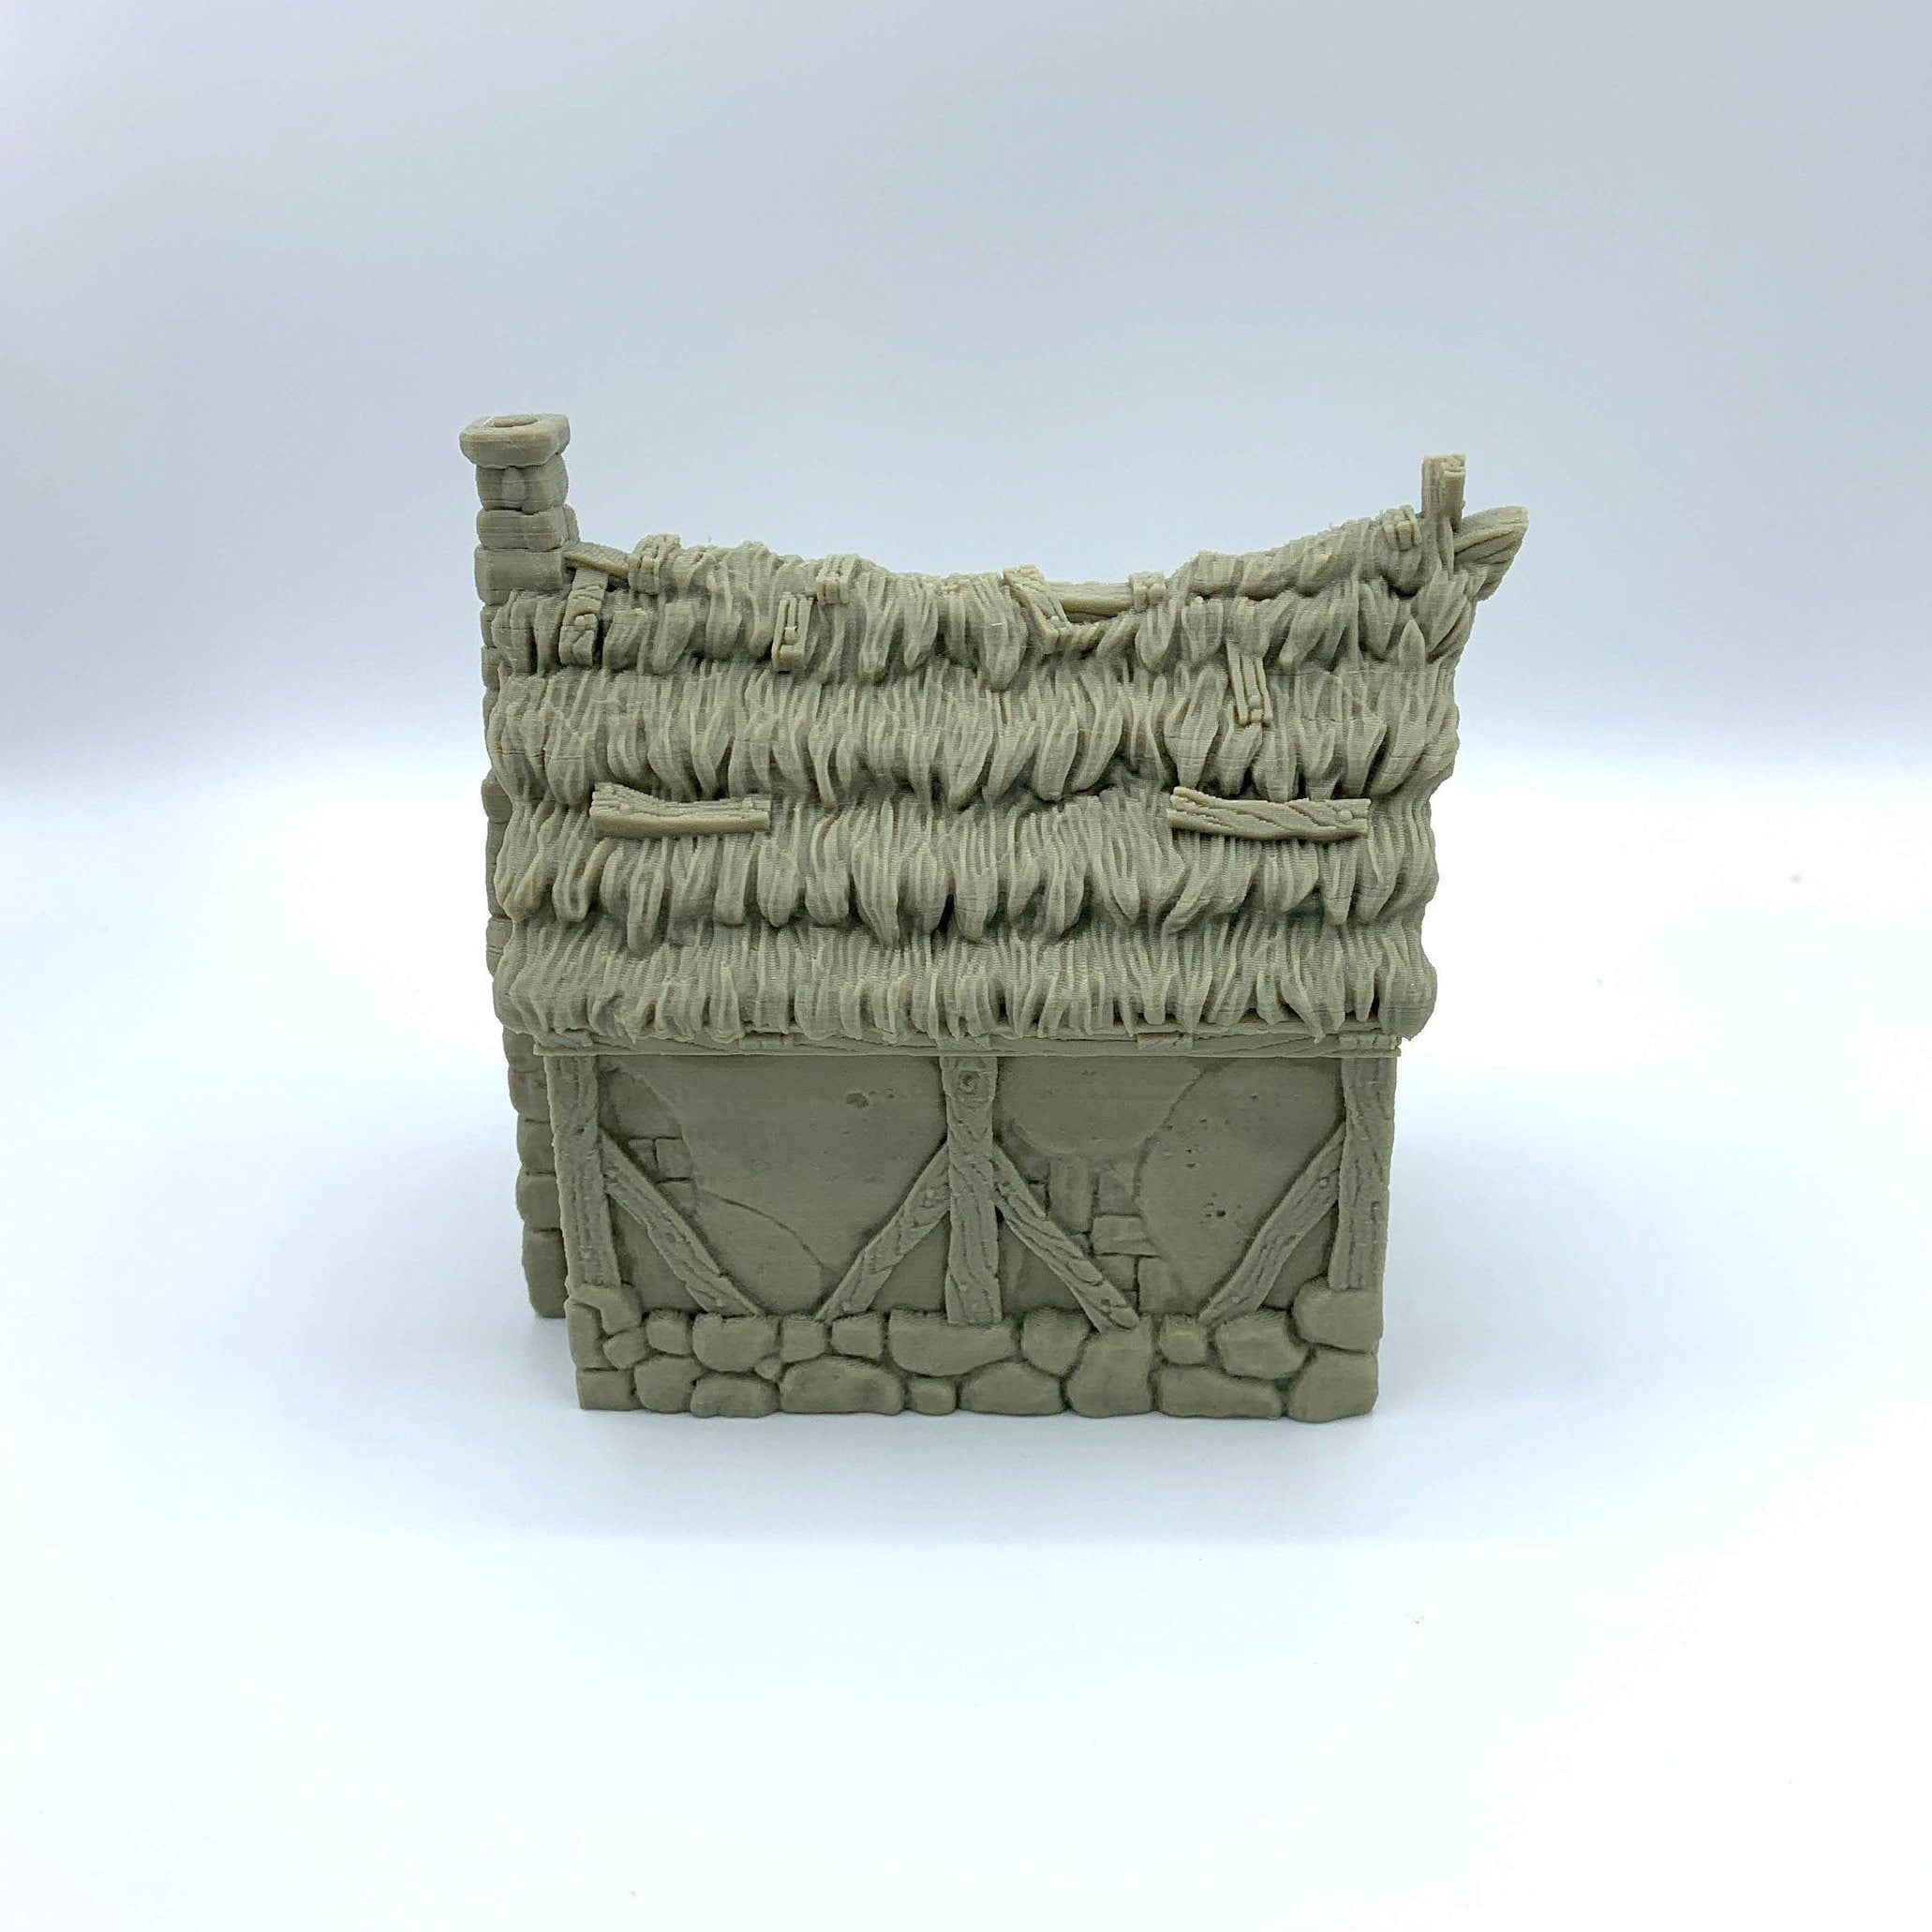 City Of Tarok - Medieval House 4 (Thatched Roof Version) / 28mm Wargame / RPG 3d Printed Tabletop Terrain